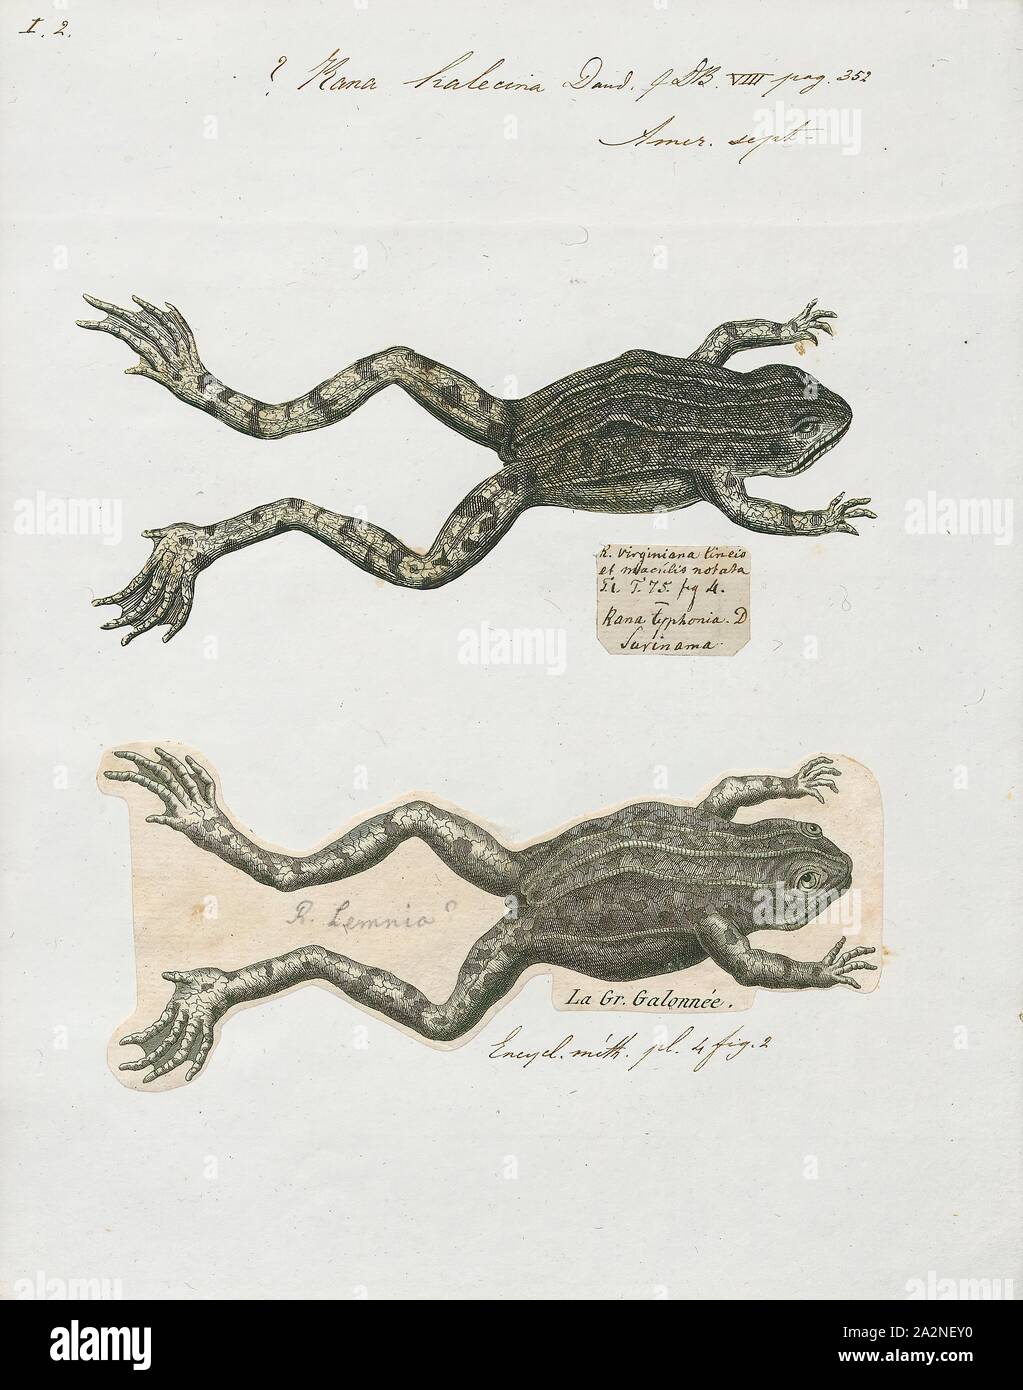 Rana halecina, Print, The southern leopard frog (Lithobates sphenocephalus or Rana sphenocephala) is a species of true frog. It is native to eastern North America from Kansas to New York to Florida. It is also an introduced species in some areas., 1700-1880 Stock Photo